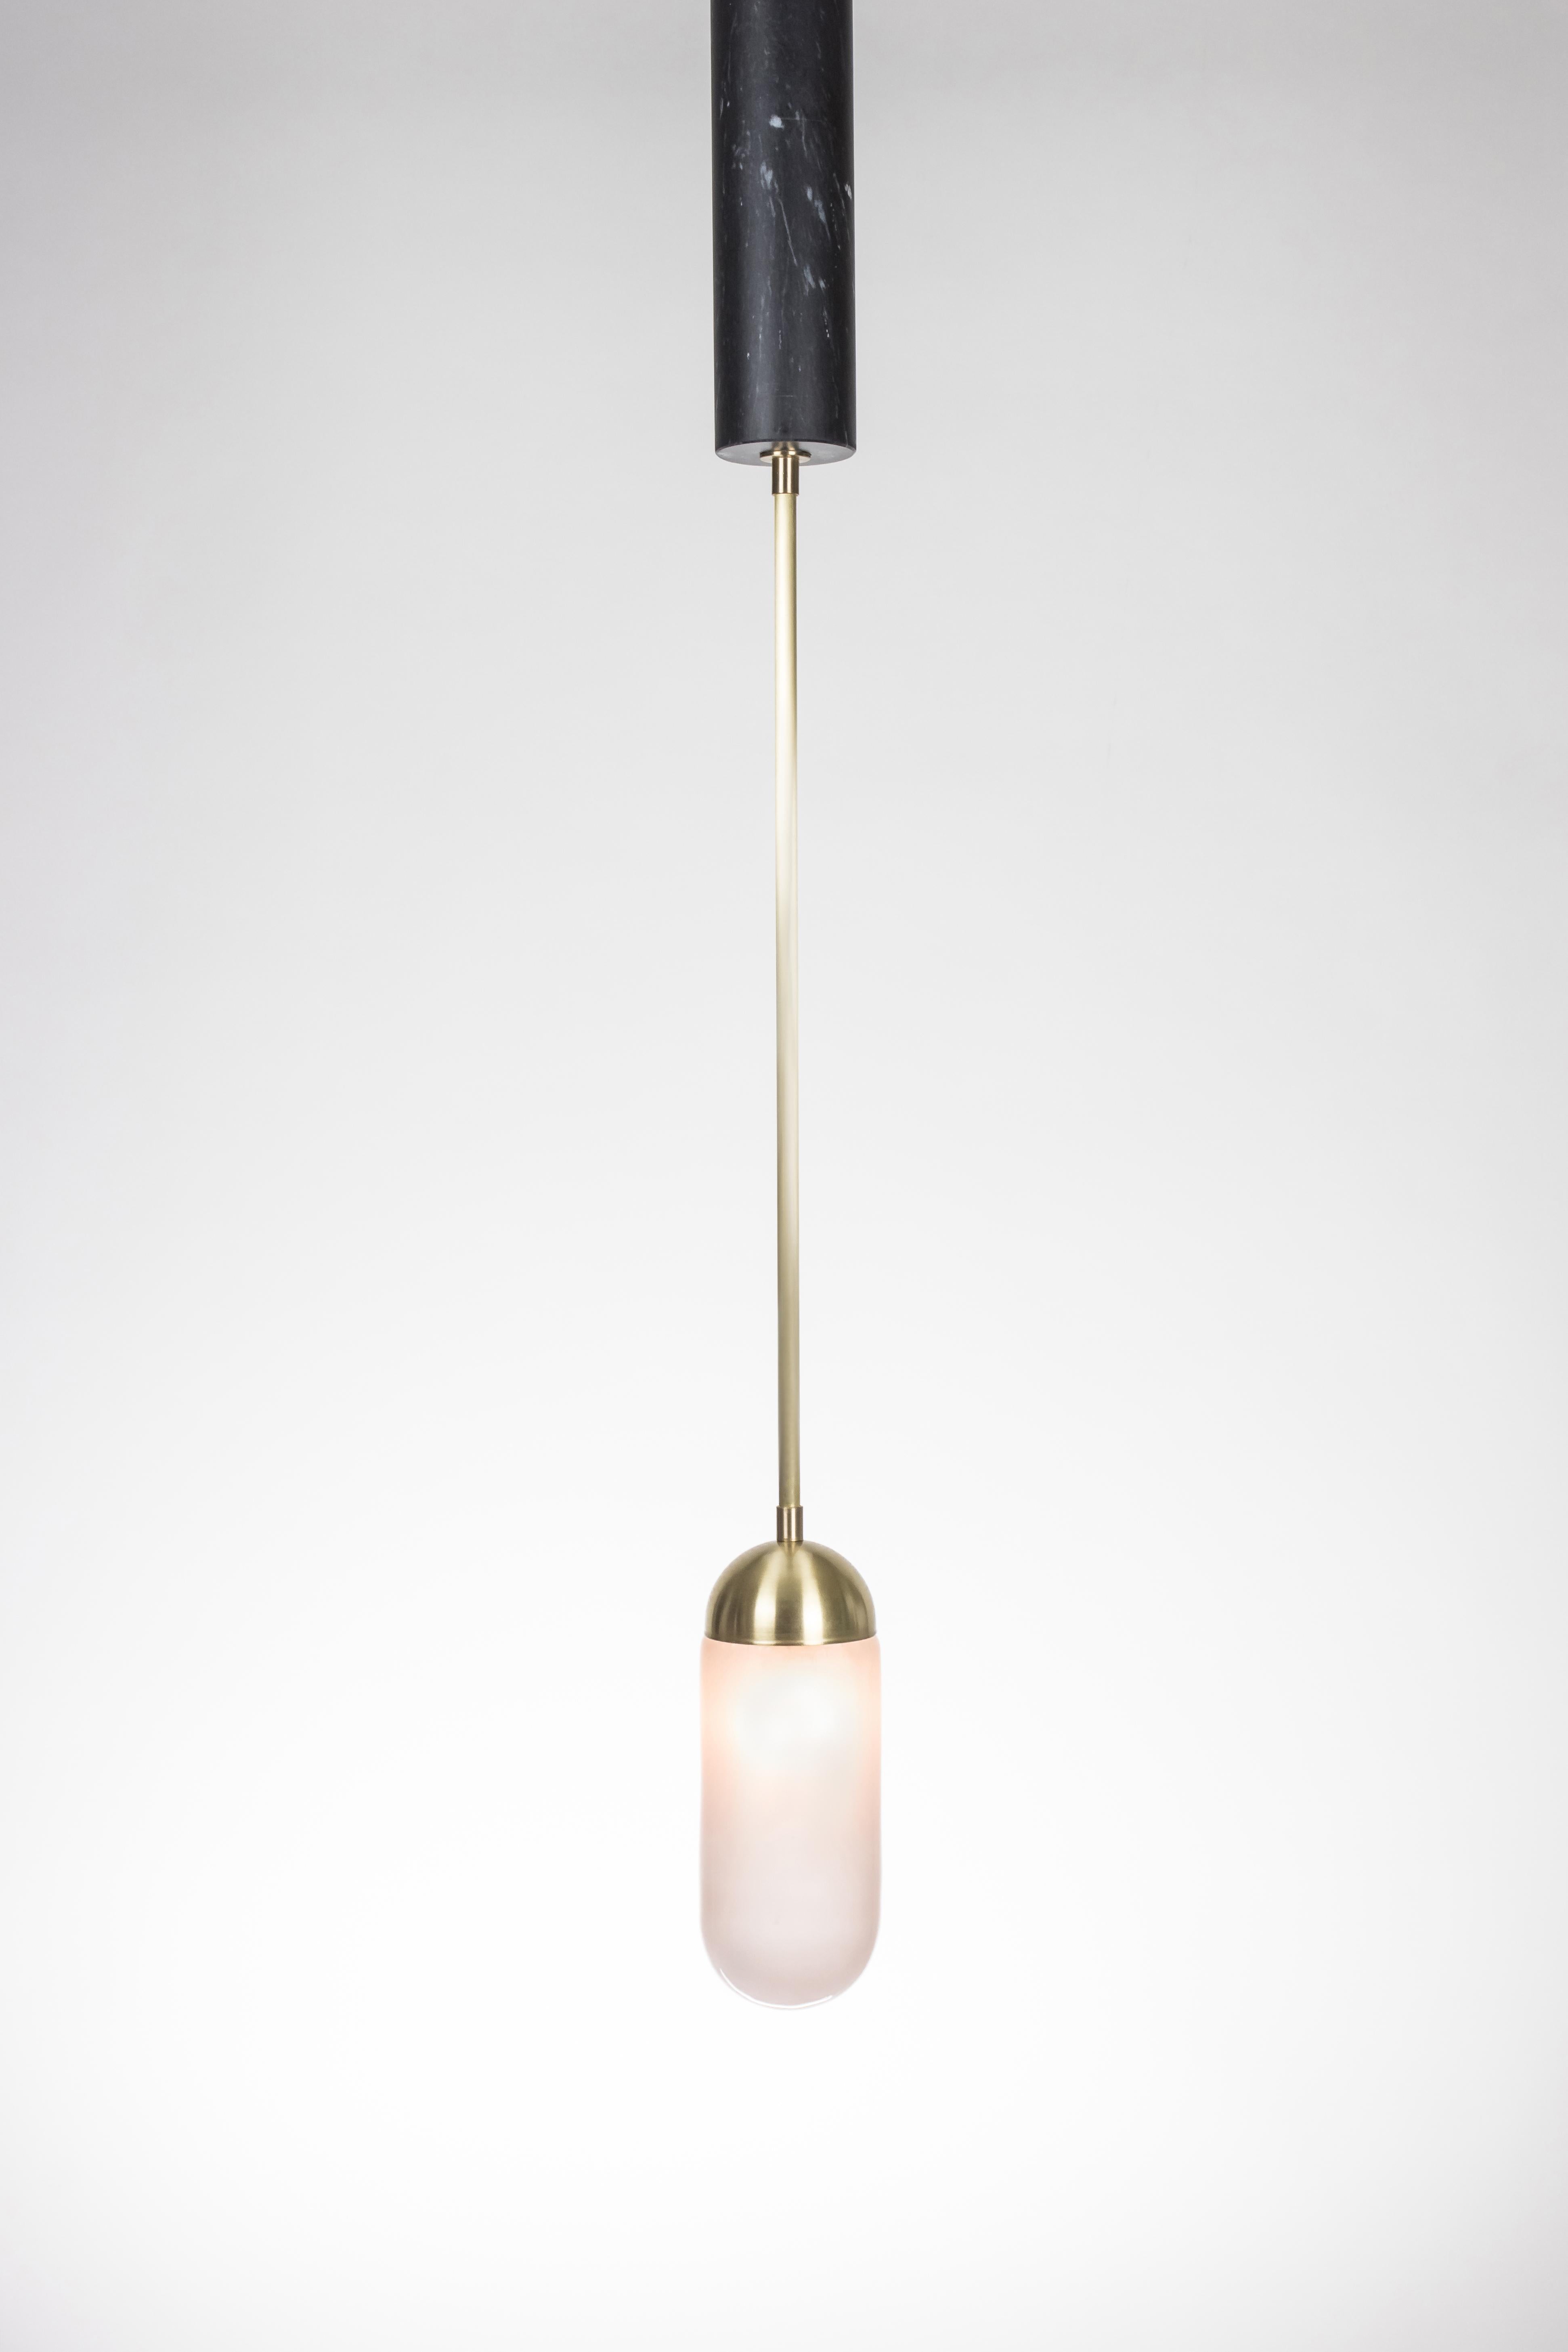 Meridian Single, Capsule Contemporary Pendant, Handblown Glass, Brass, Marble For Sale 3